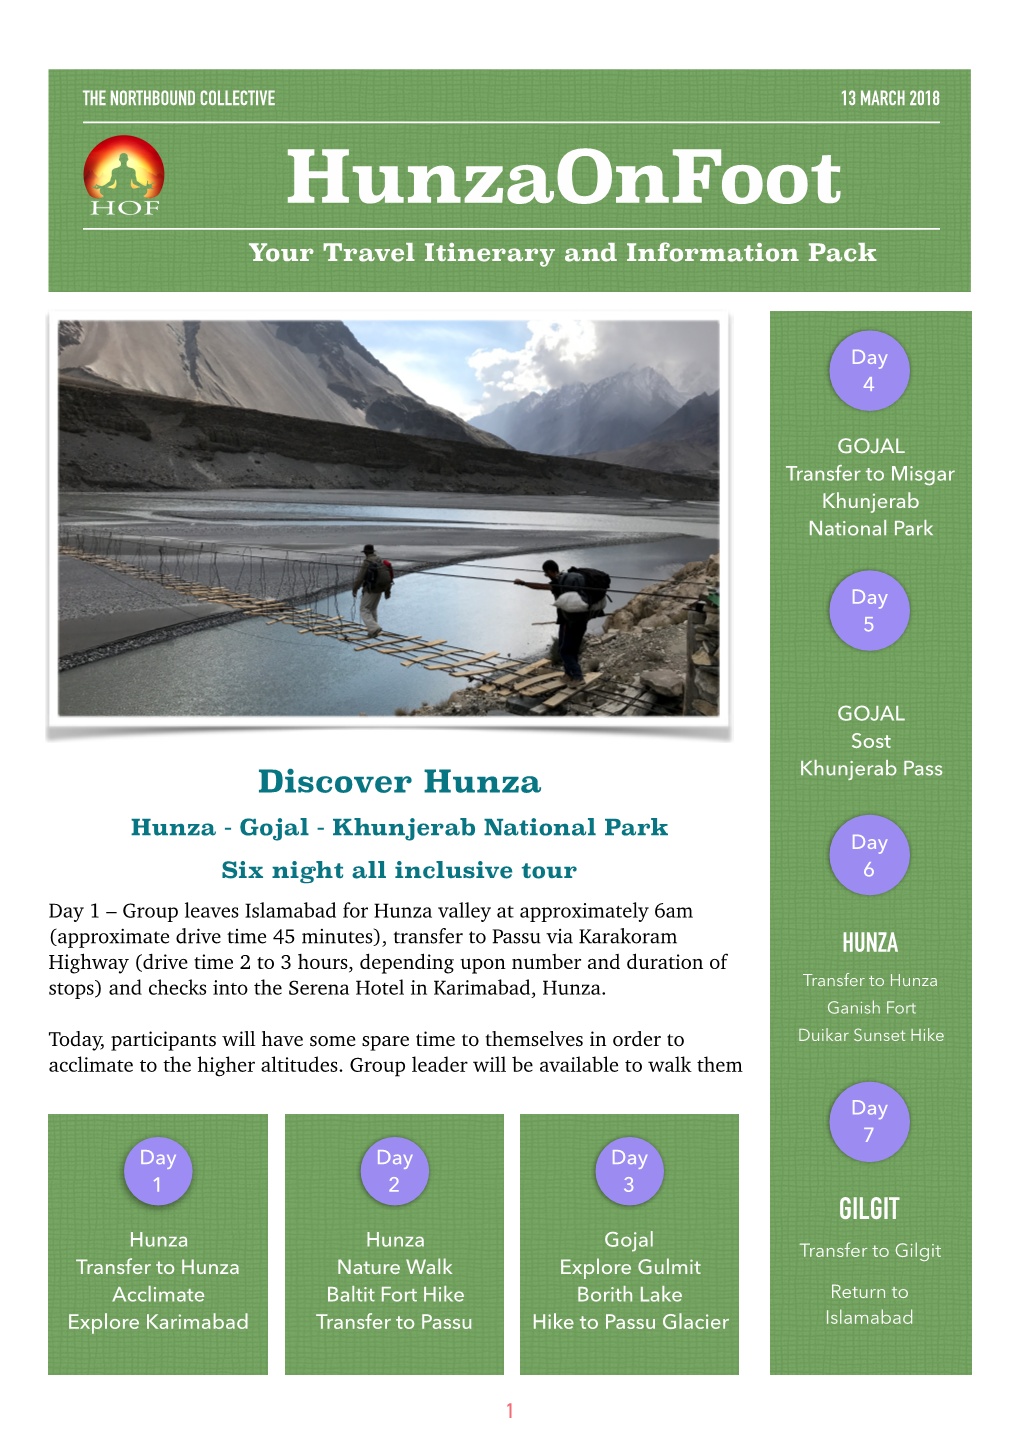 Discover Hunza Itinerary and Information Pack